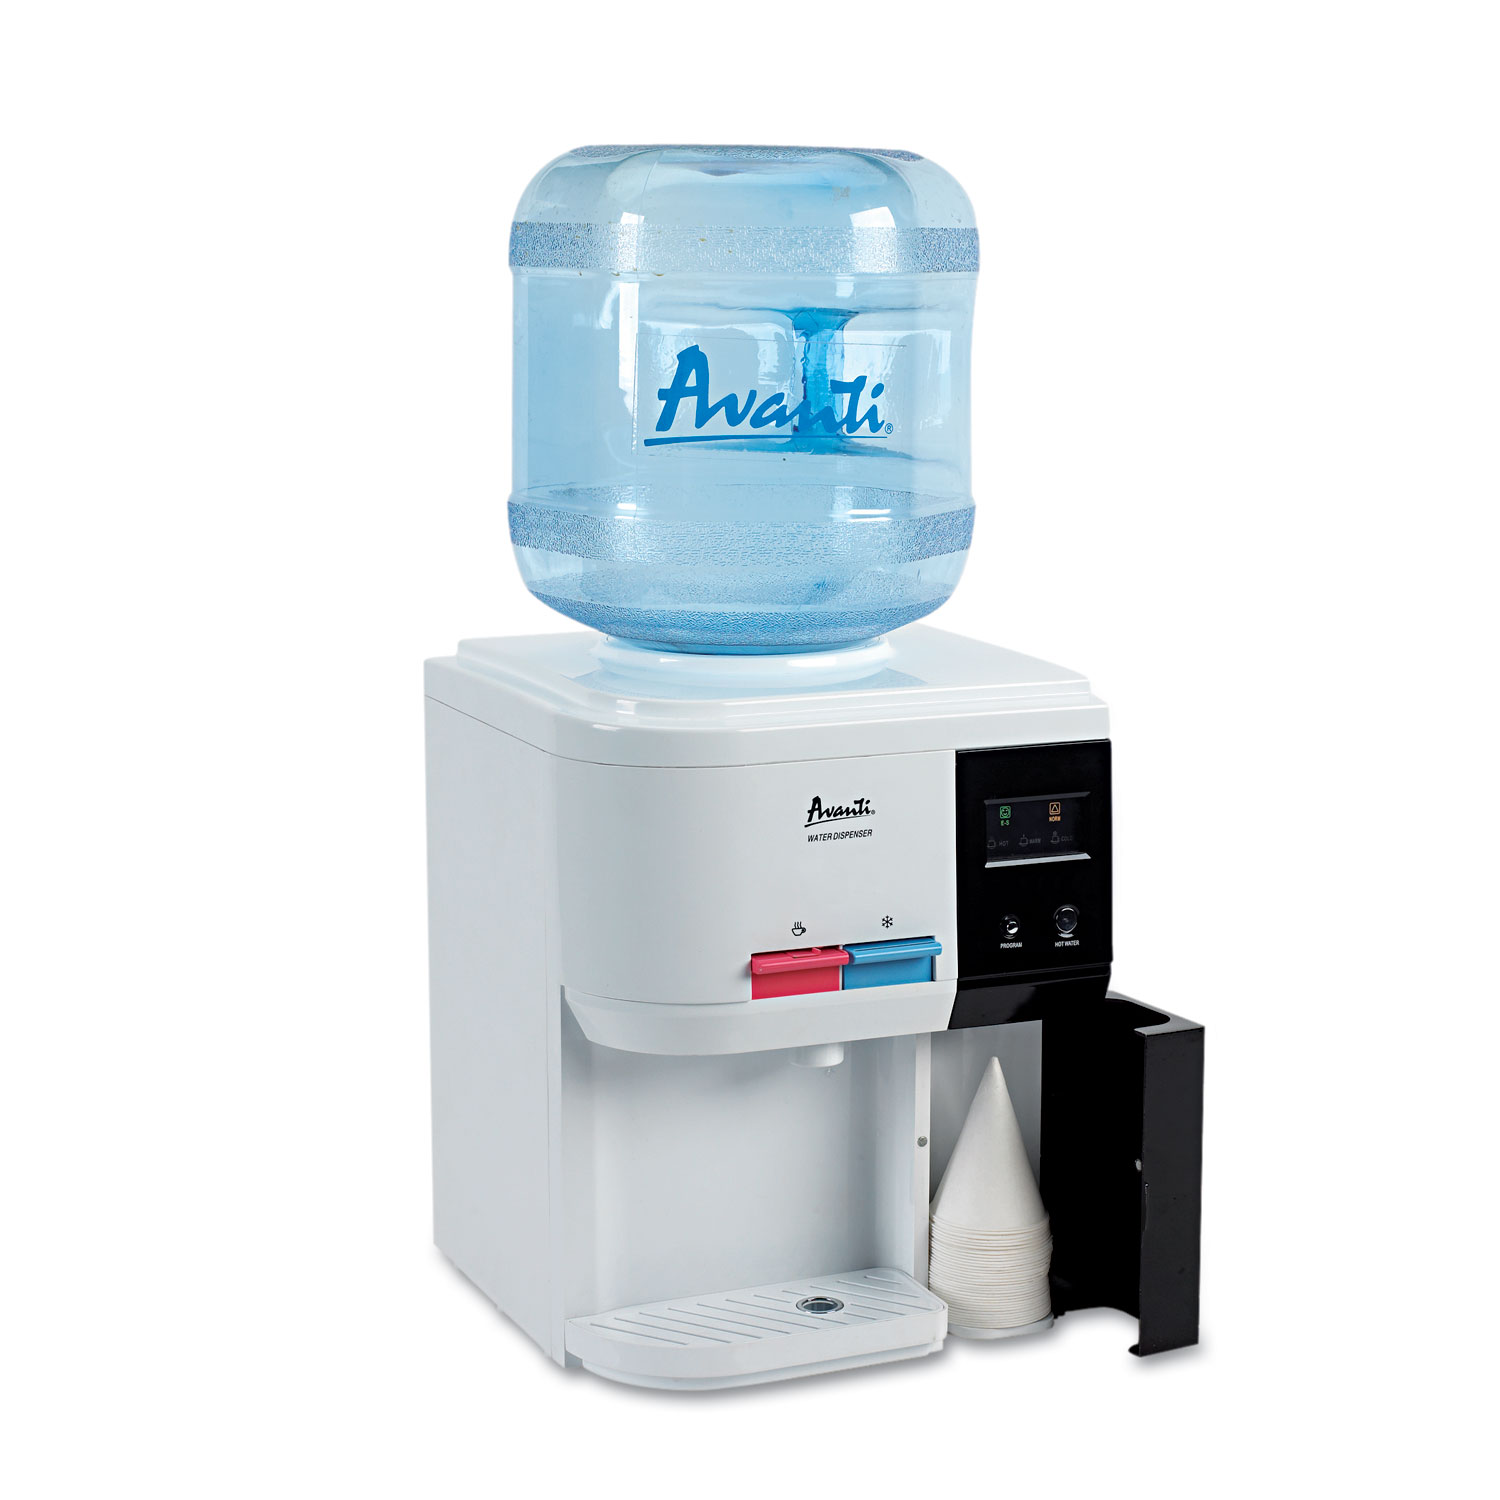 Tabletop Thermoelectric Water Cooler, 13 1/4 dia. x 15 3/4h, White